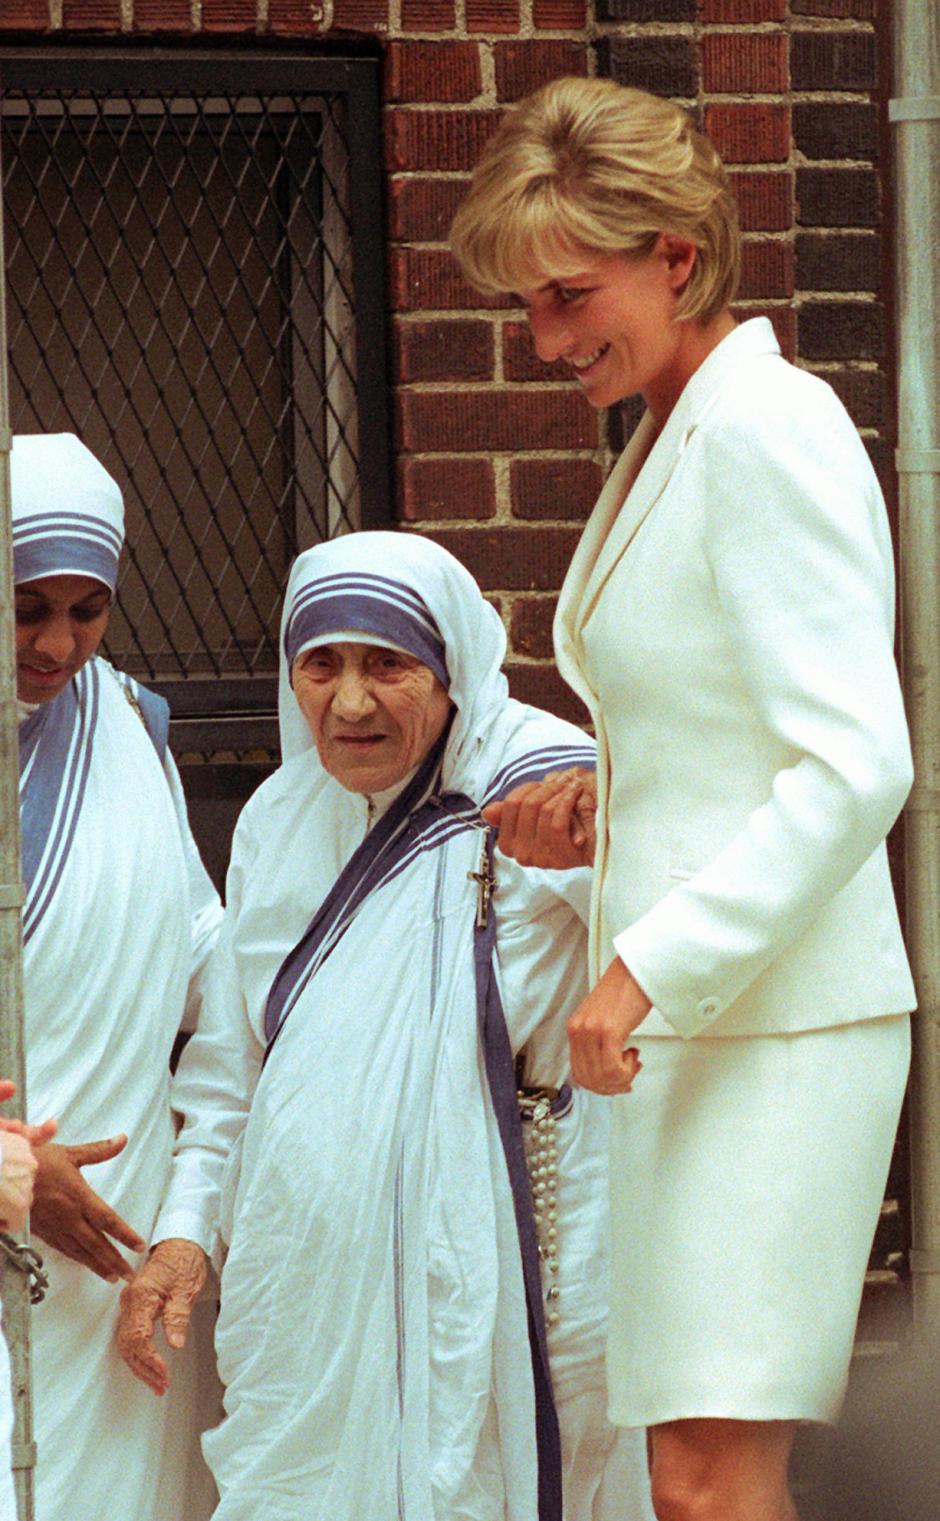 Mother Teresa, left, walks with Princess Diana after receiving a visit from her Wednesday, June 18, 1997, in New York.